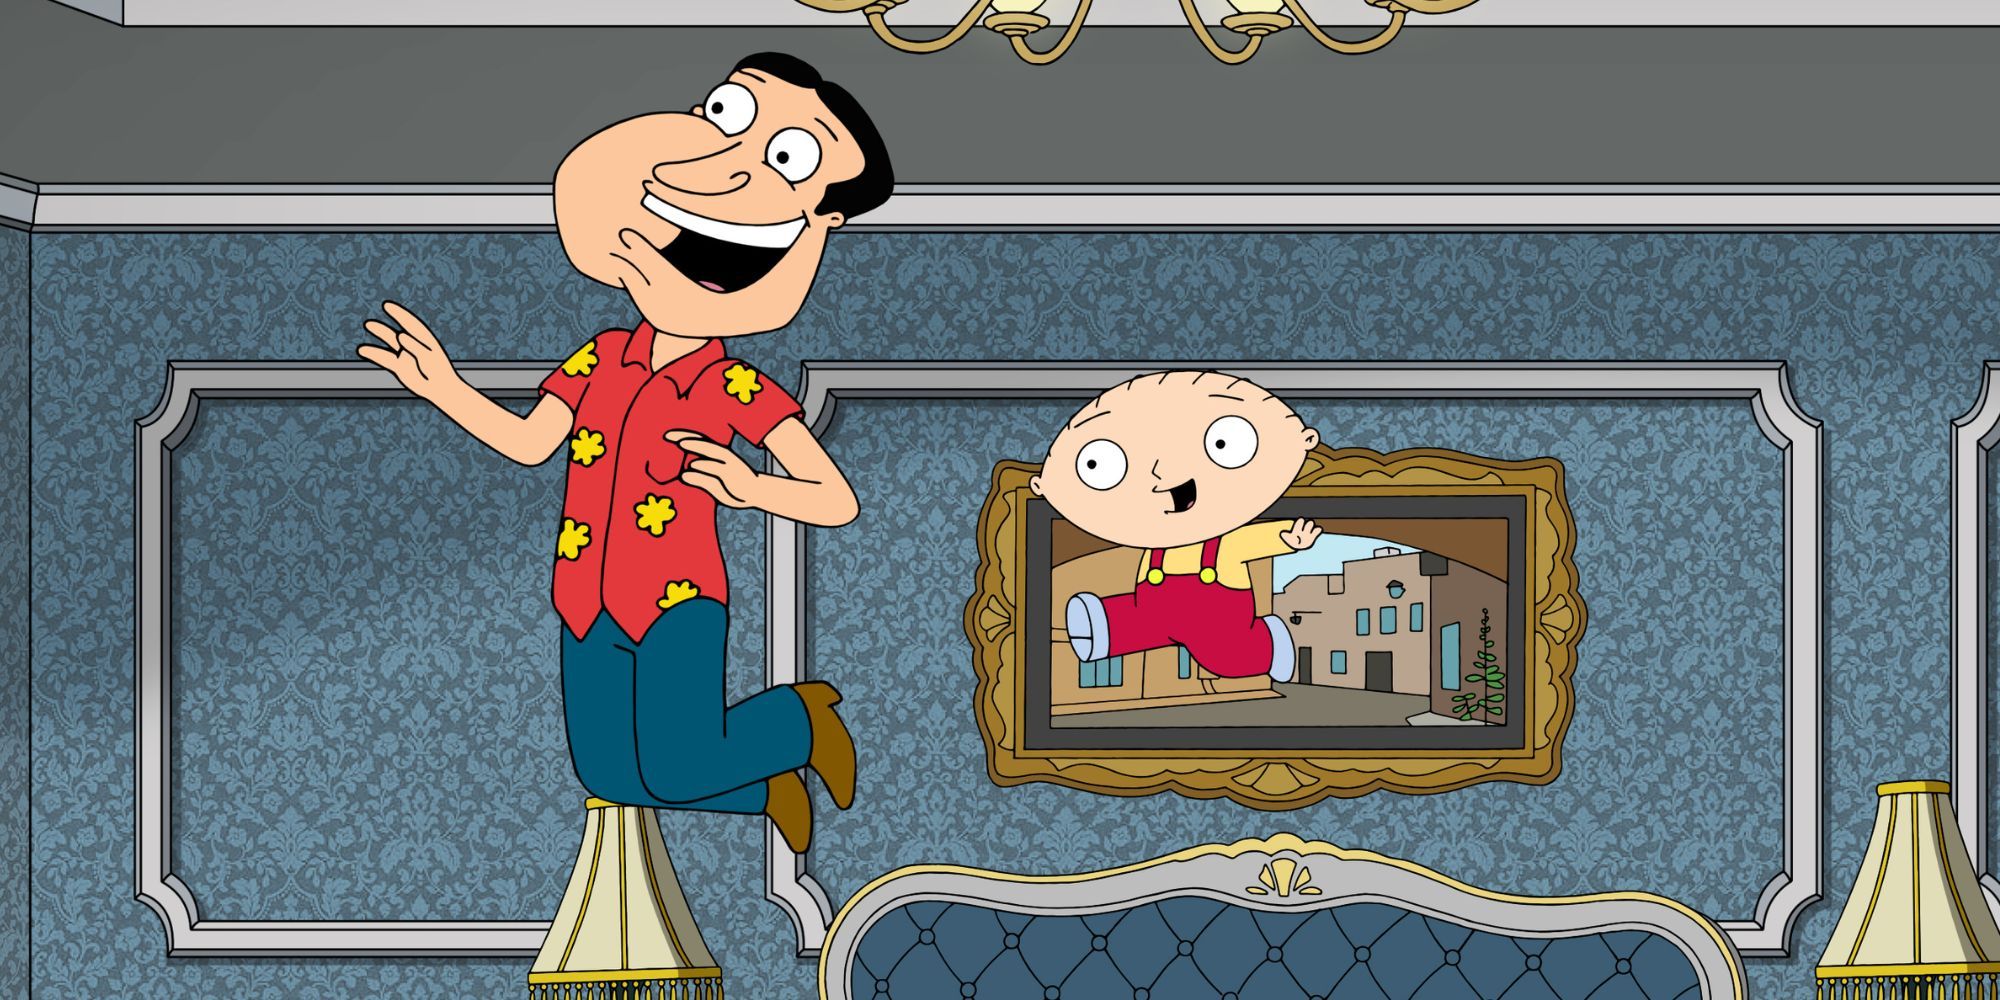 Glenn Quagmire and Stewie Griffin jumping on a bed in Family Guy